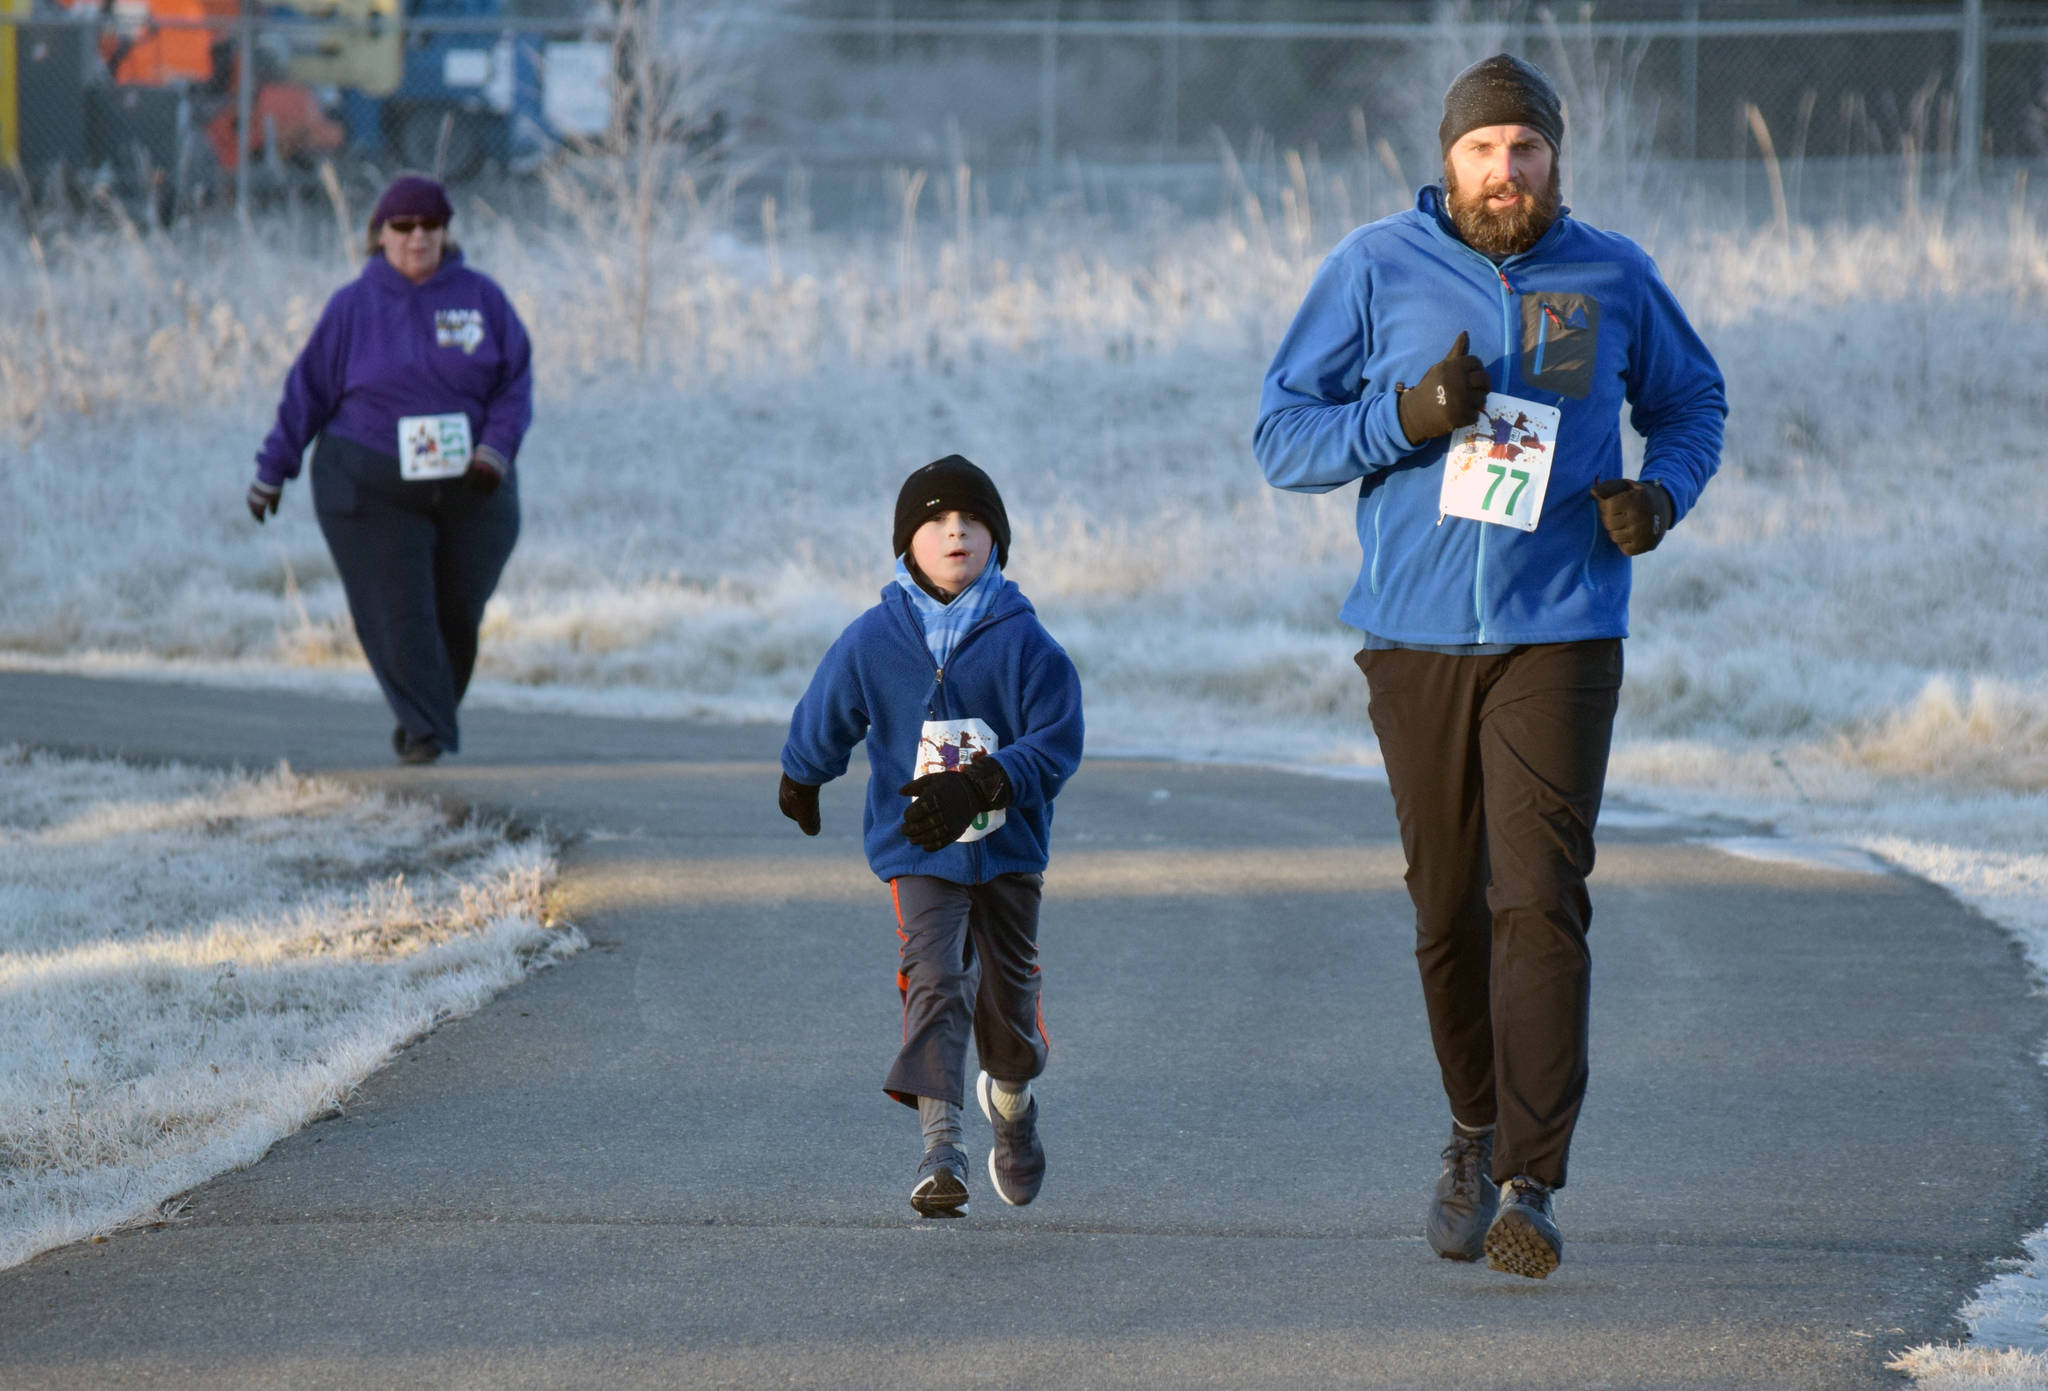 Hans Schlegel, 40, of Soldotna and his son Benjamin near the end of the three-mile race at the Turkey Trot at the Soldotna Regional Sports Complex on Thursday, Nov. 22, 2018. (Photo by Jeff Helminiak/Peninsula Clarion)